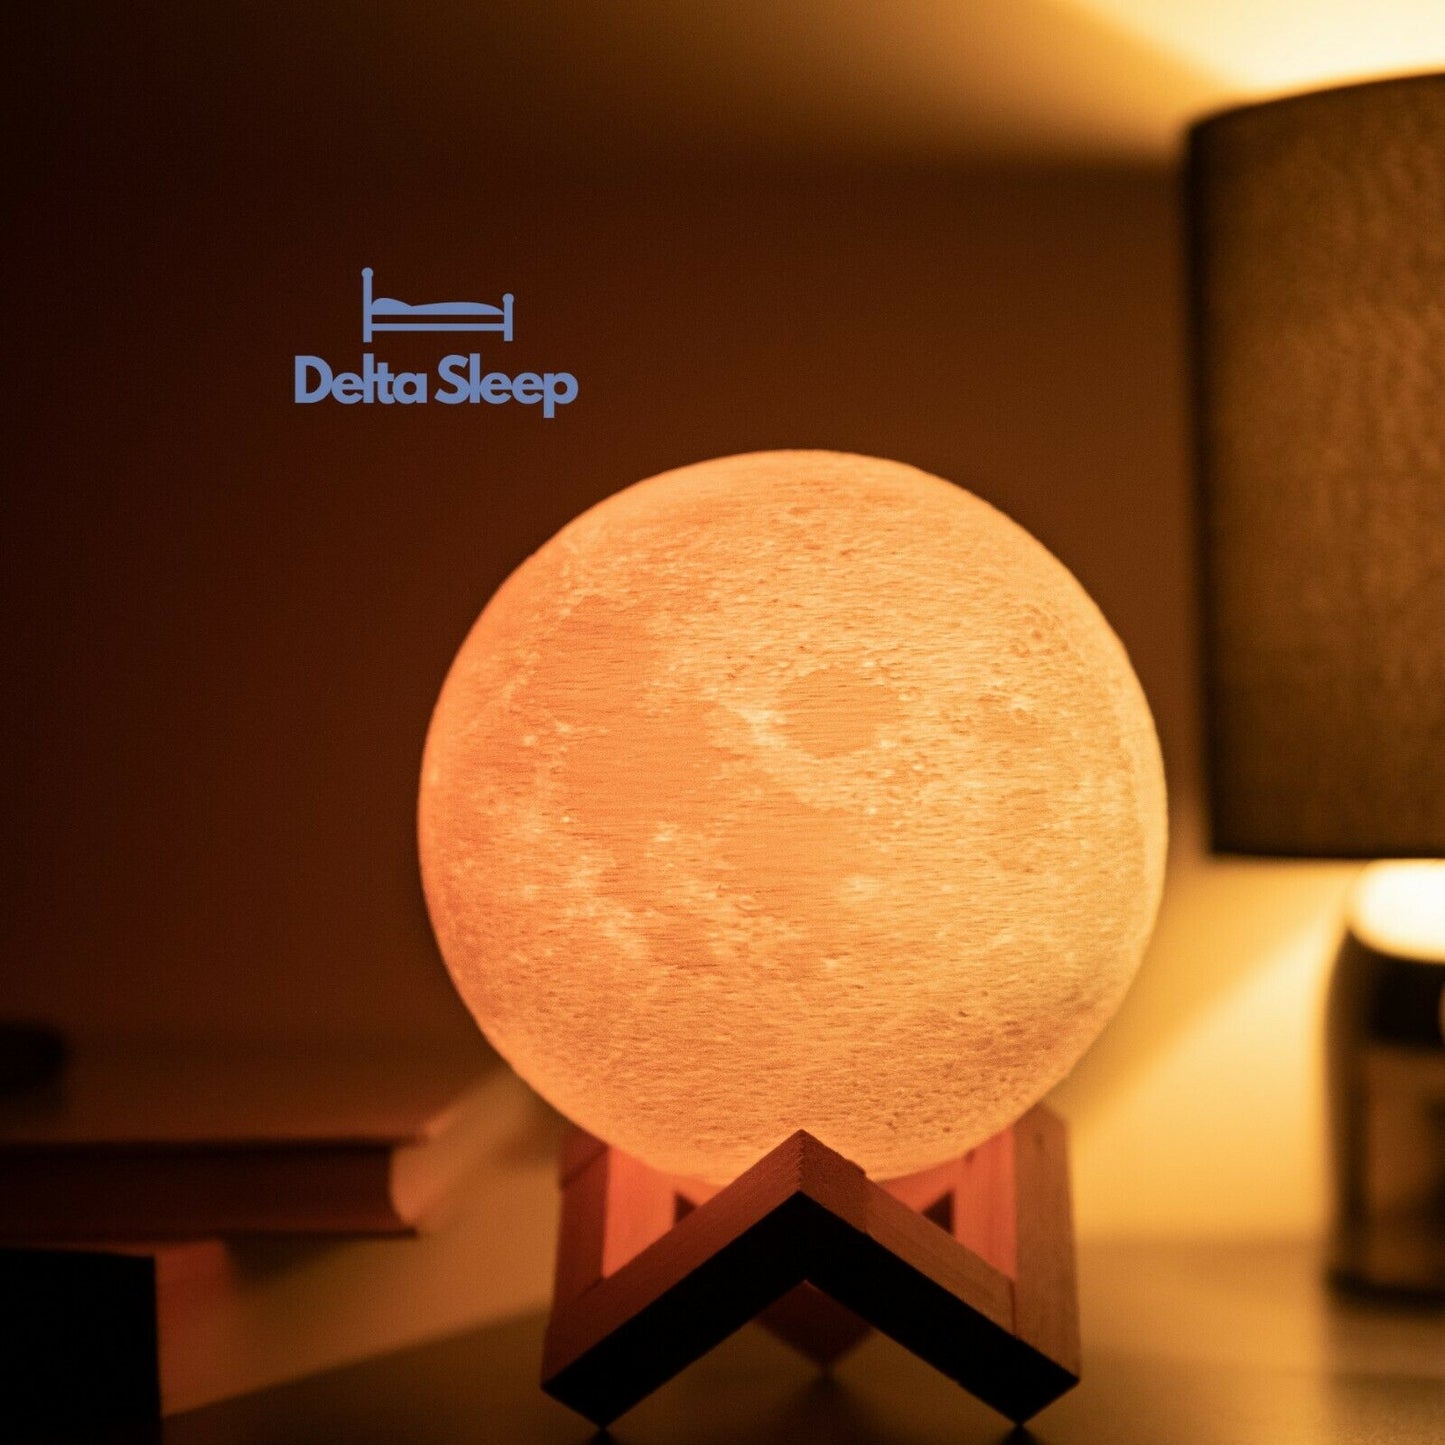 16 Colour Rechargeable Moon Lamp with Remote Control